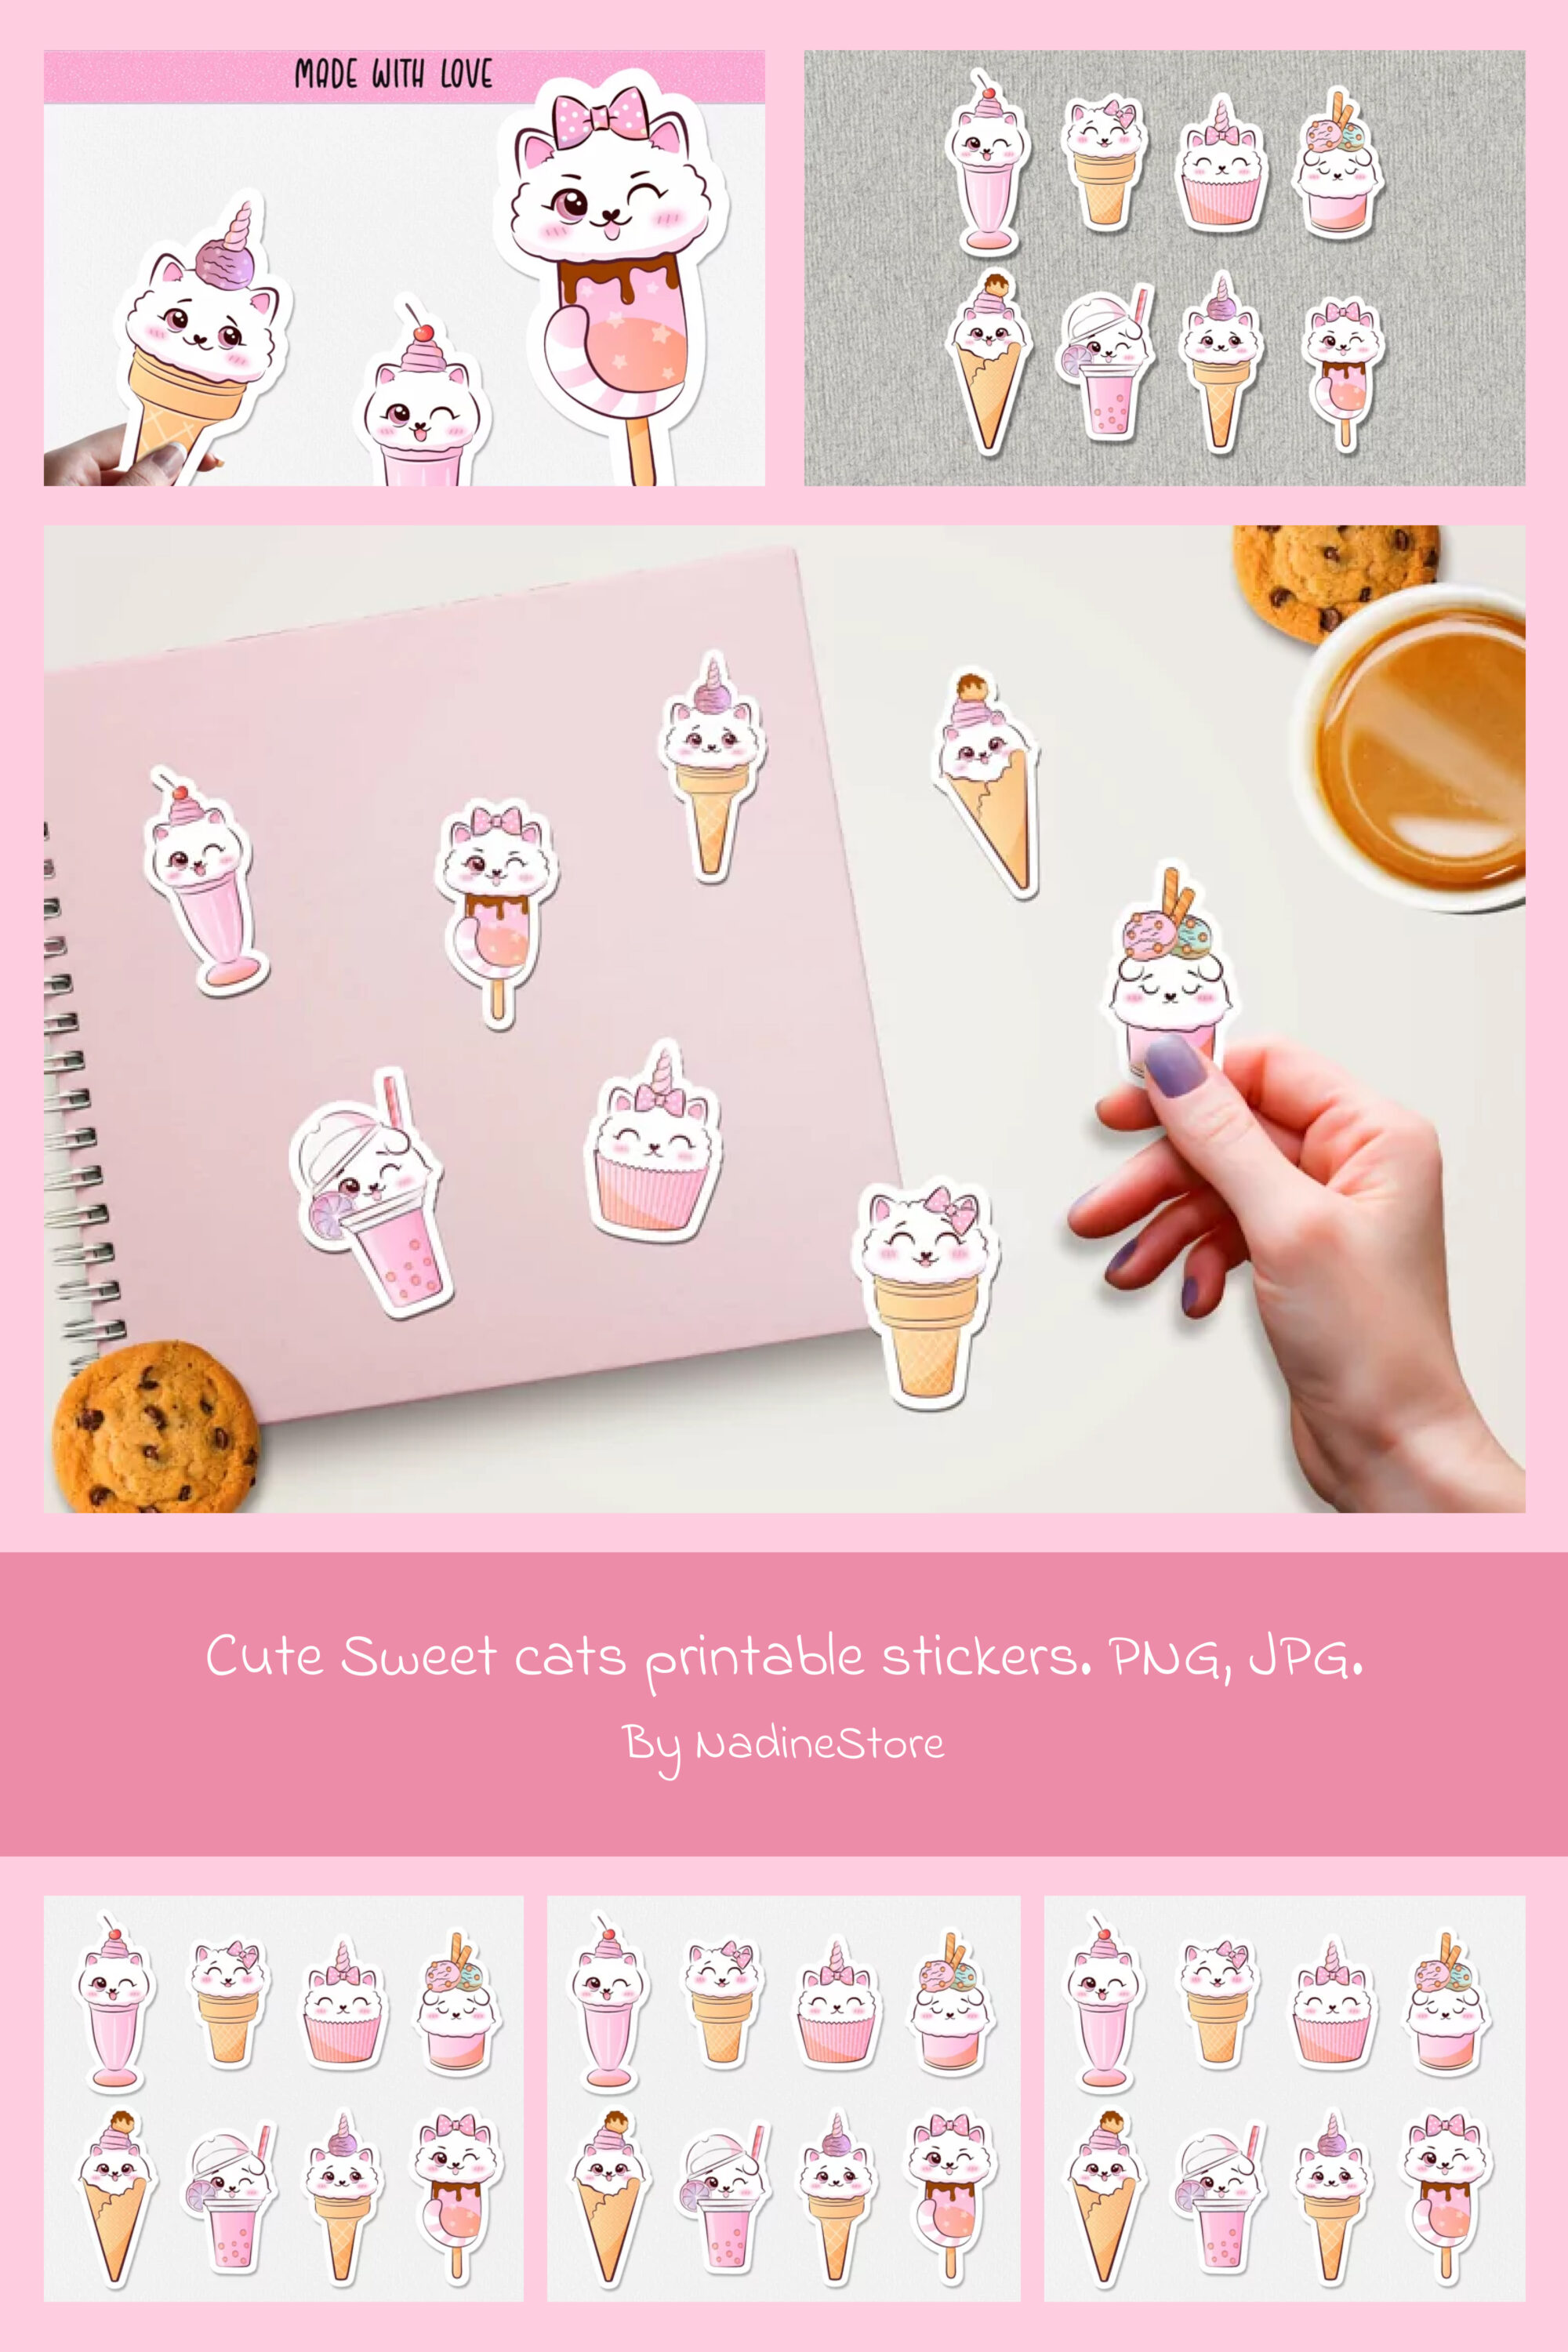 Cute sweet cats printable stickers of pinterest.